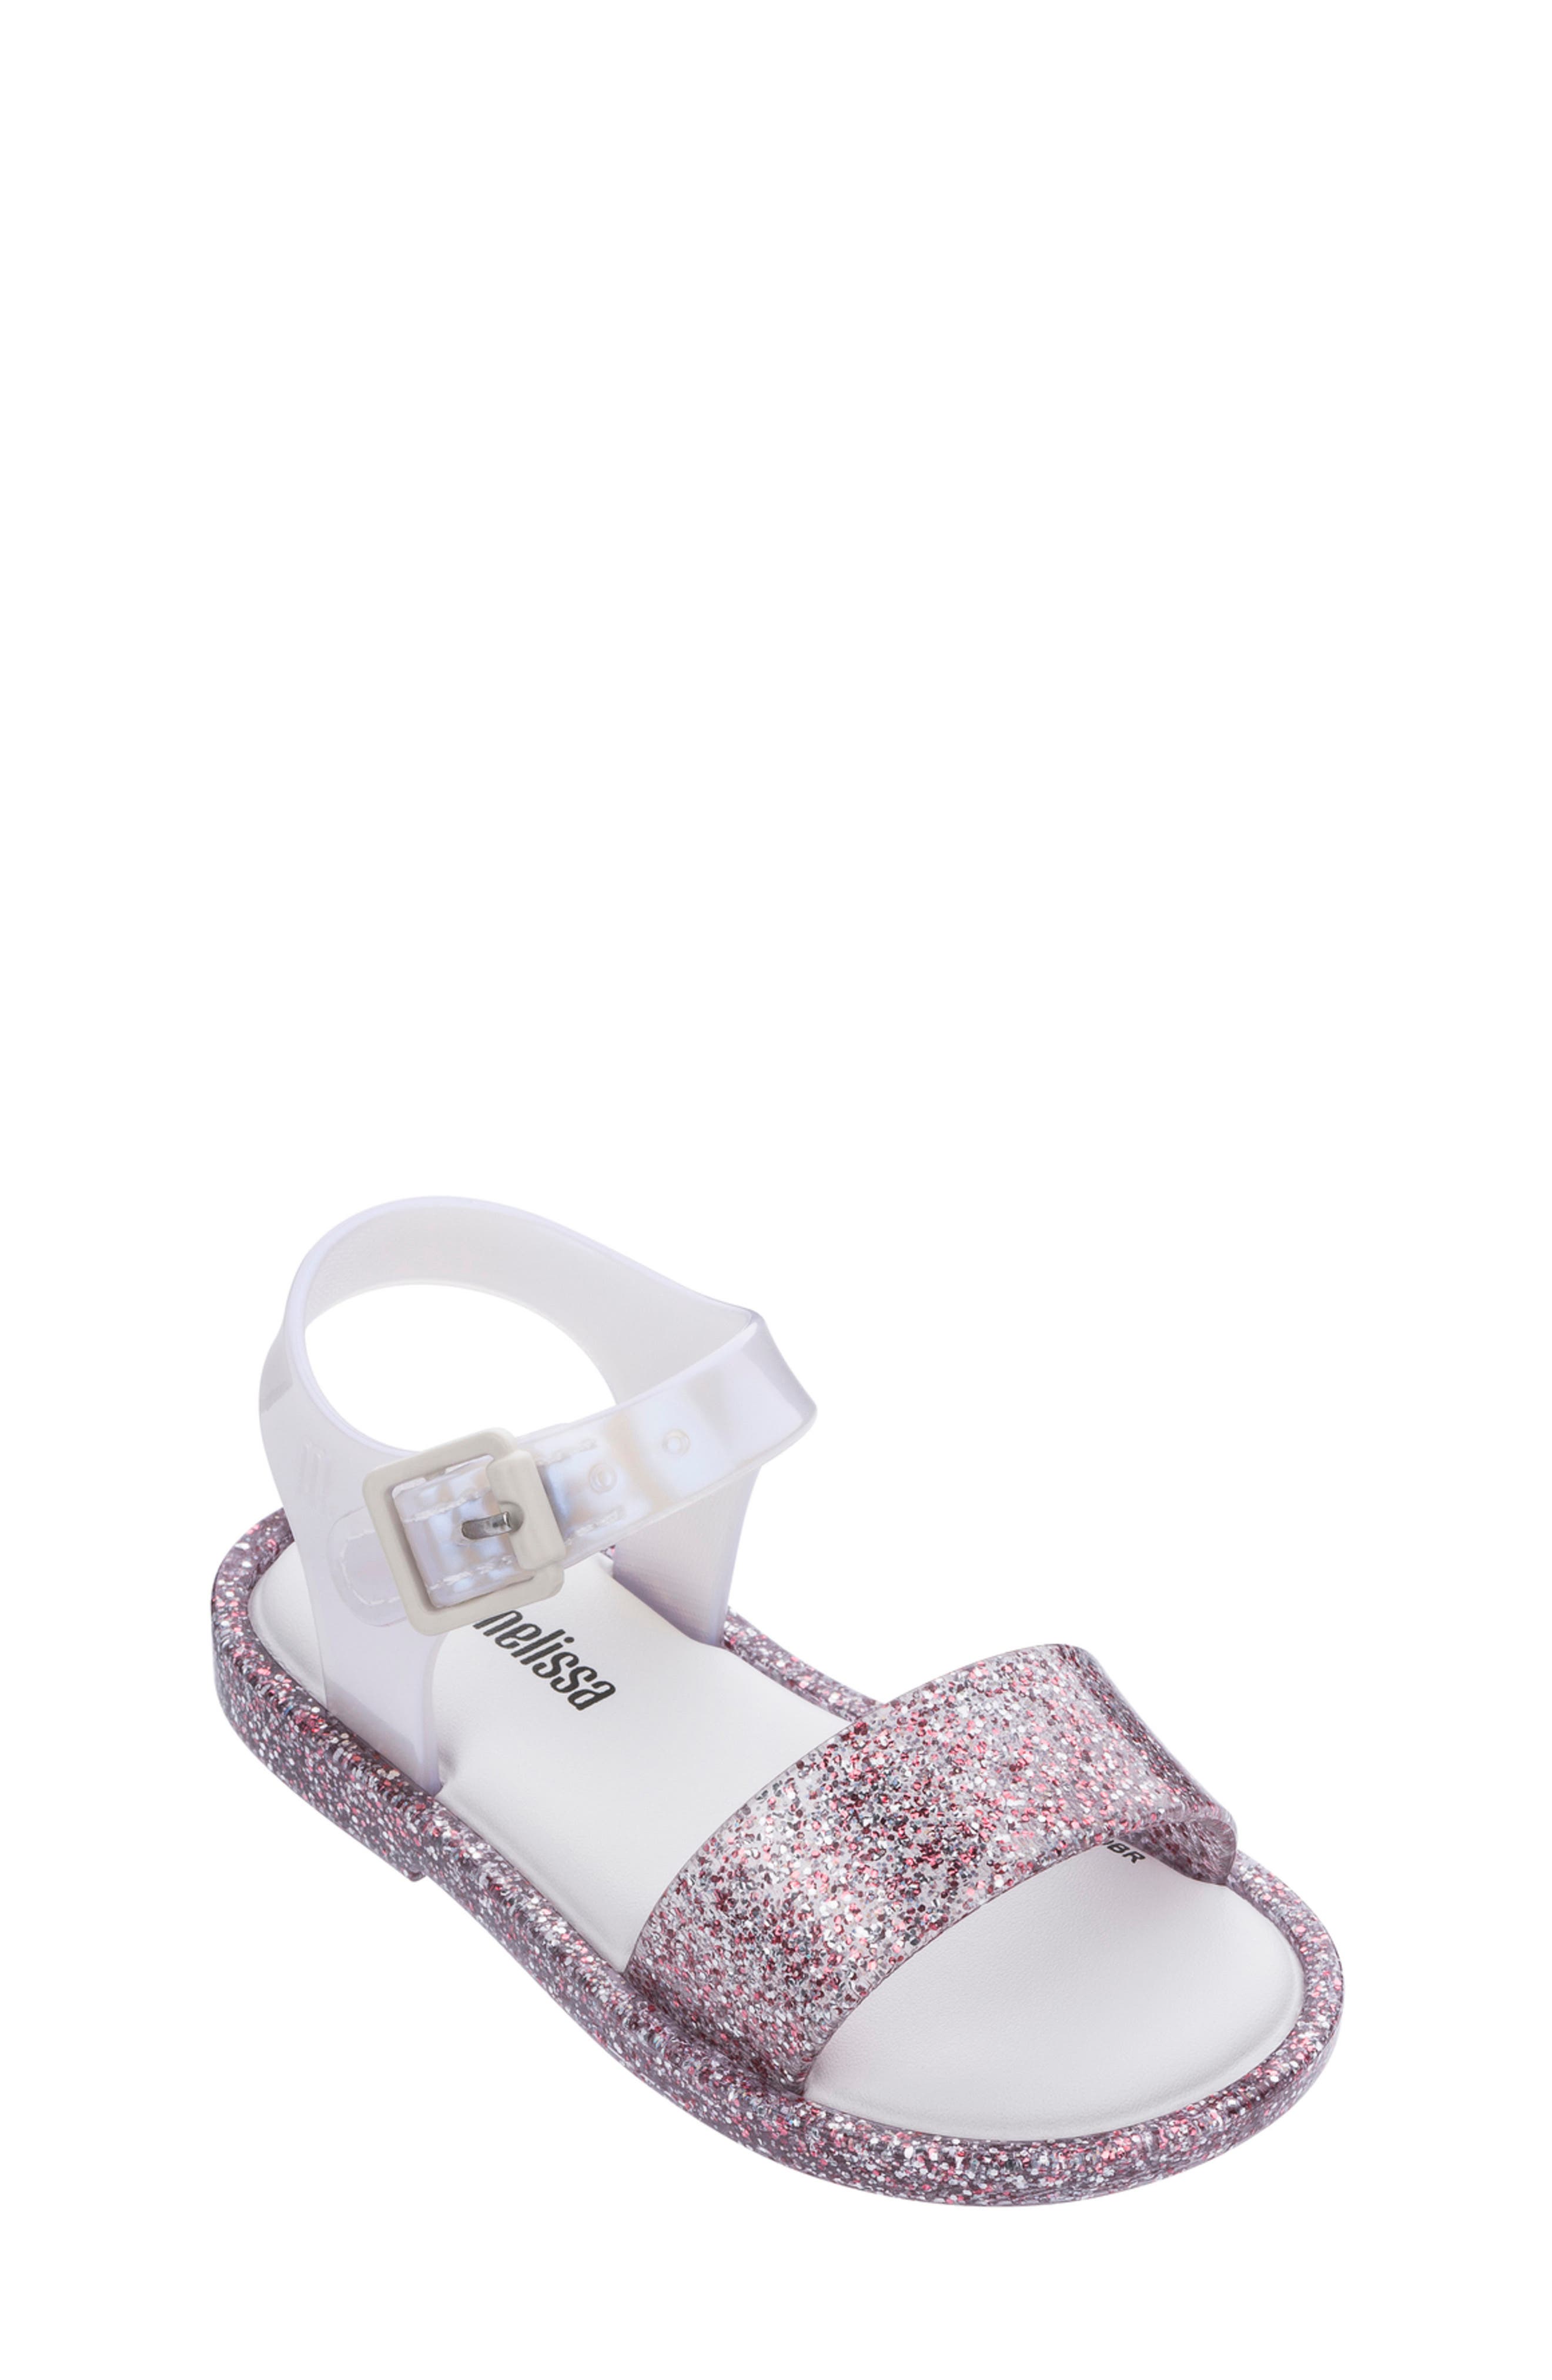 nordstrom jelly shoes